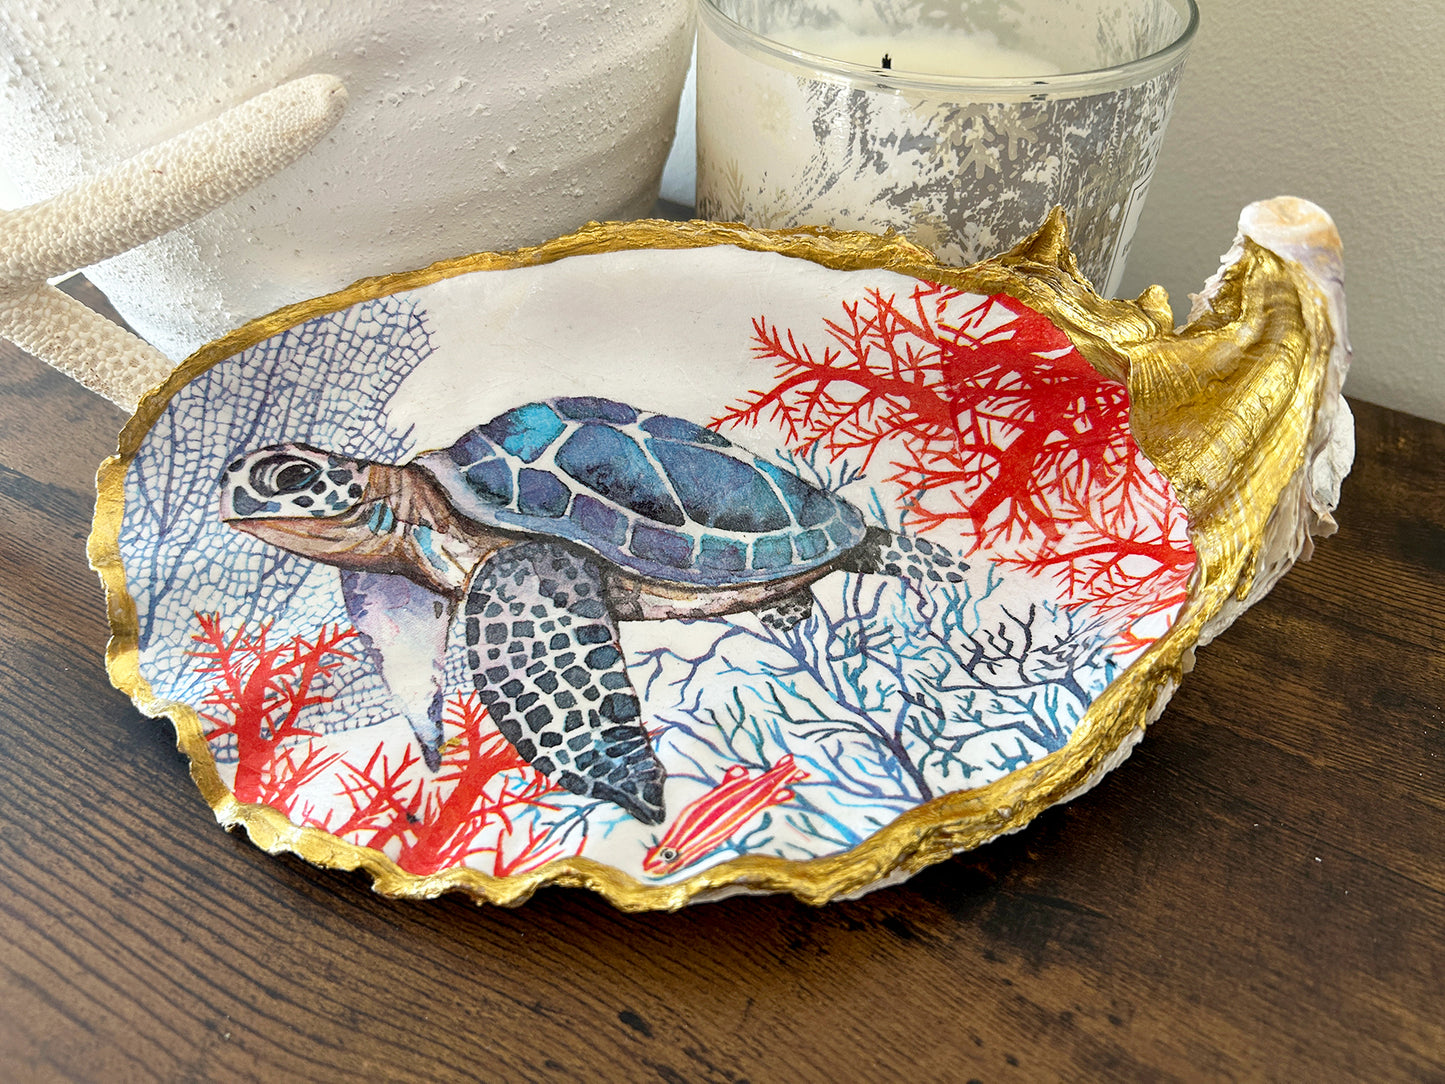 Large Sea Turtle Oyster Shell Trinket Dish